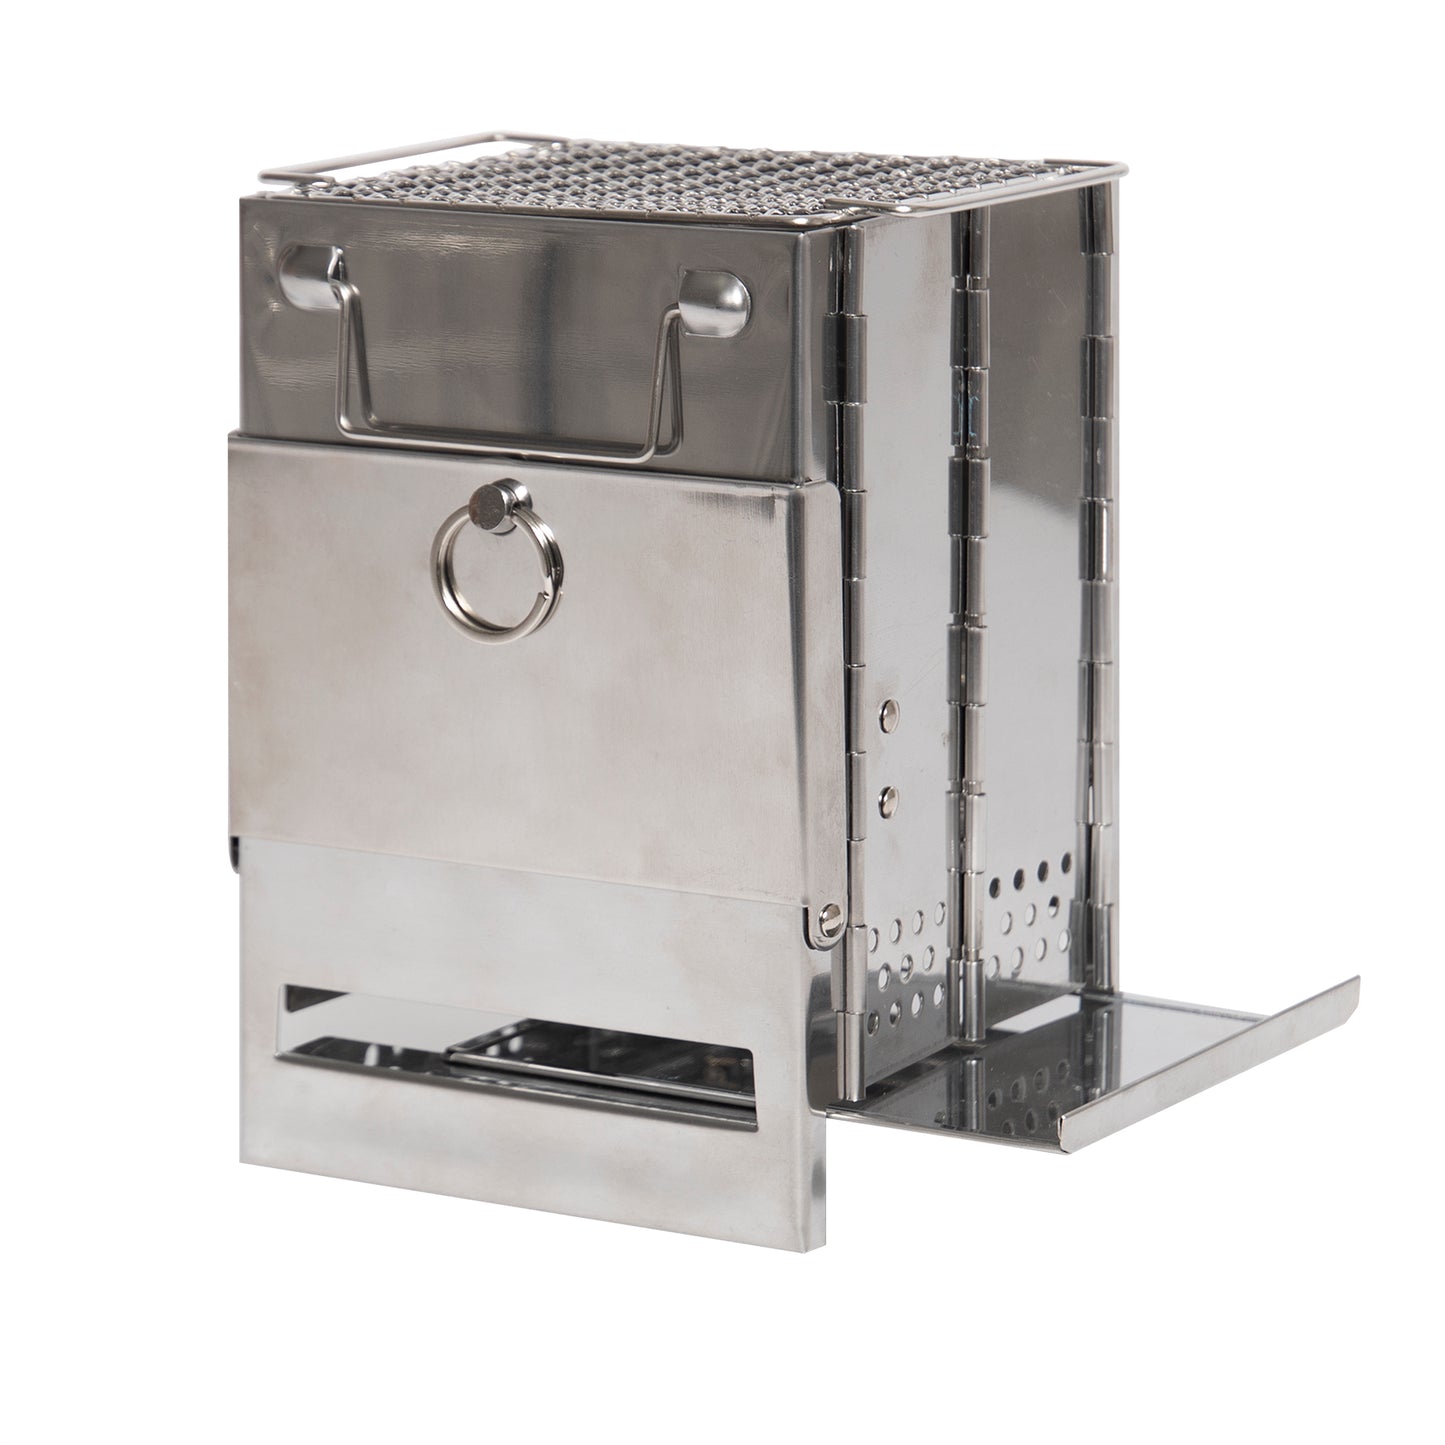 Stainless Steel Folding Camp Stove